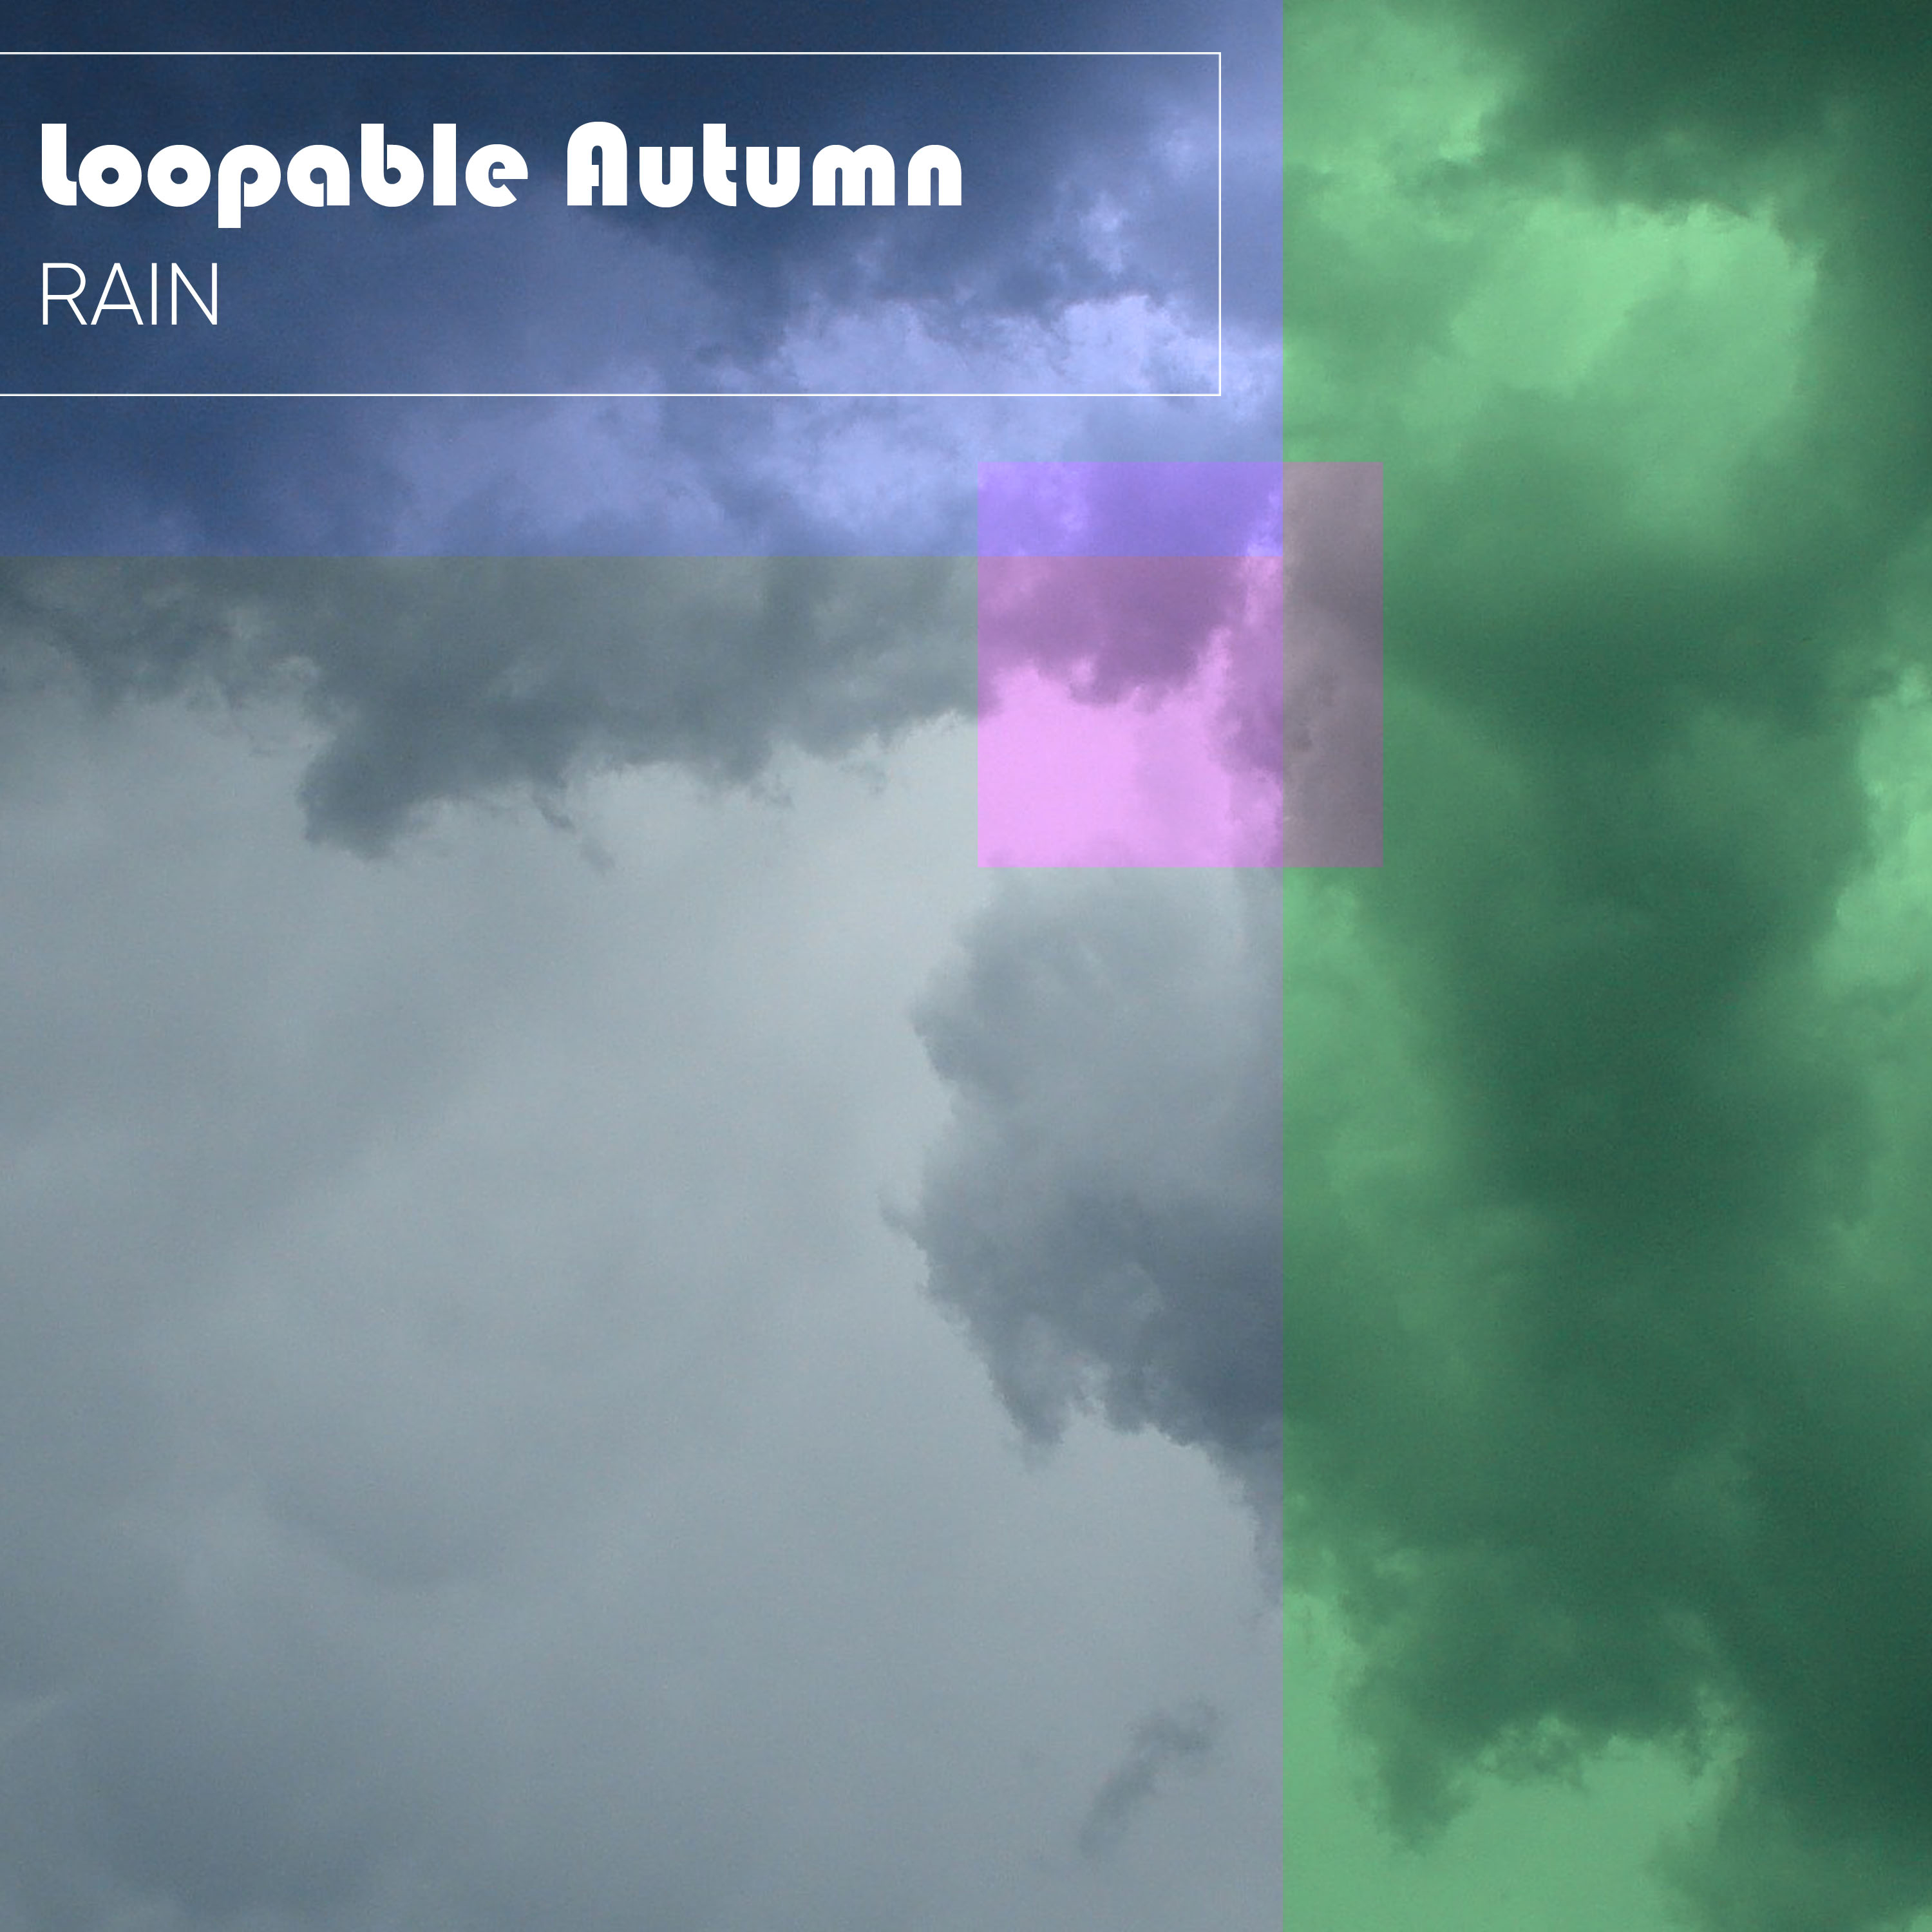 Loopable Autumn Rain for Bedtime Ambience